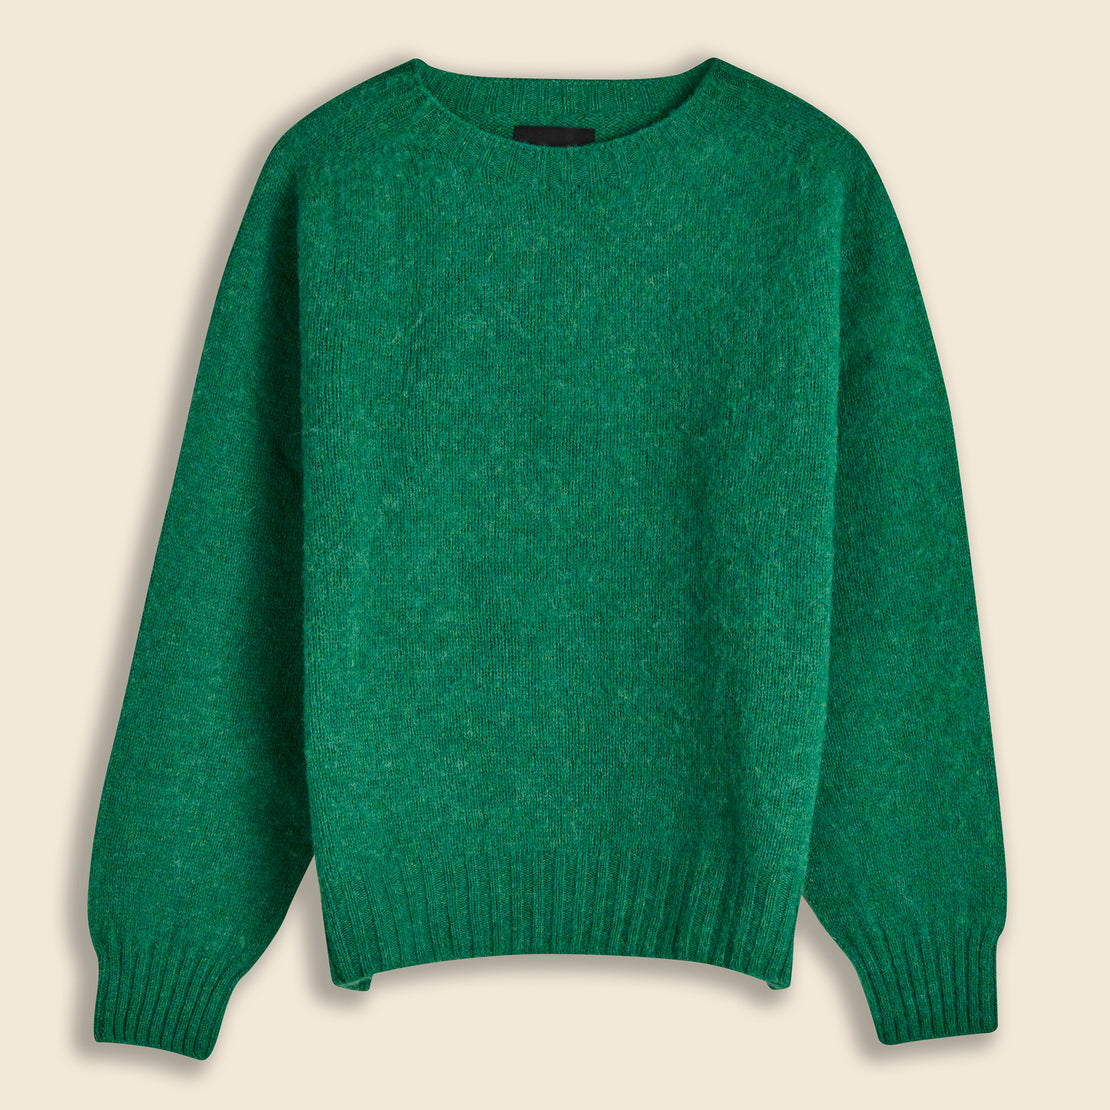 Howlin ForeverNeverMore Sweater - Green Dream